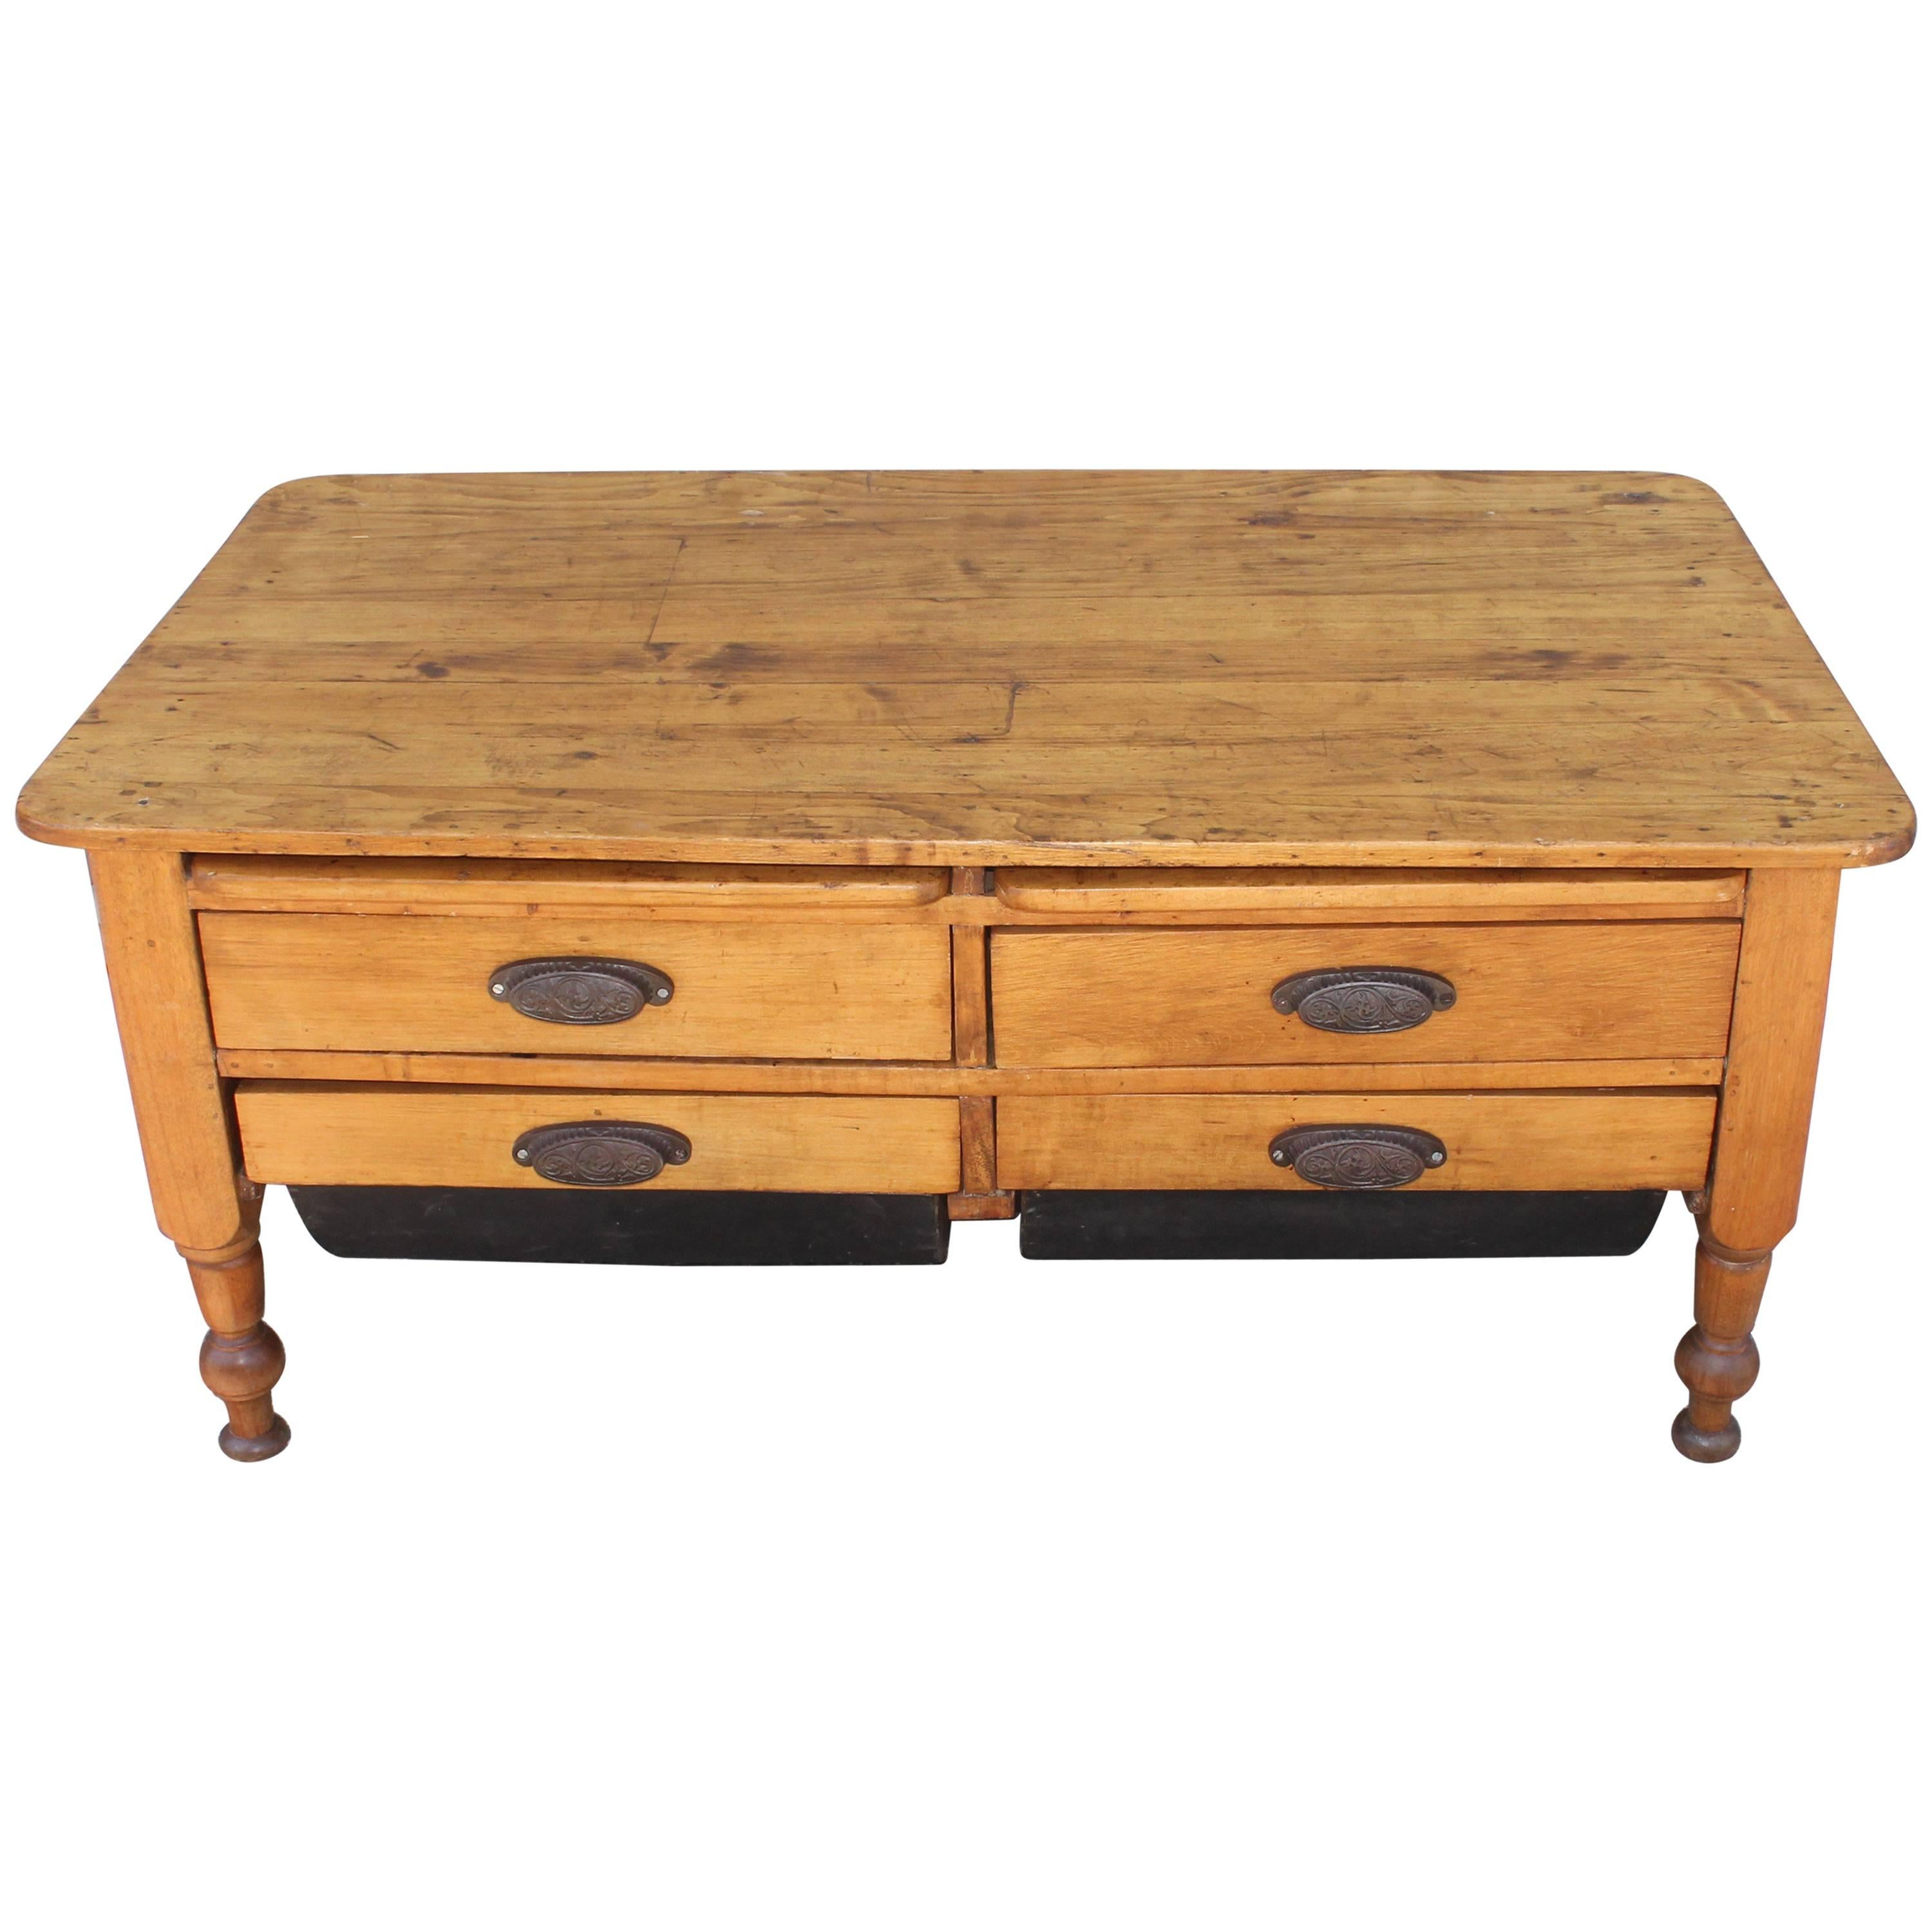 19th Century Coffee Table with Drawers